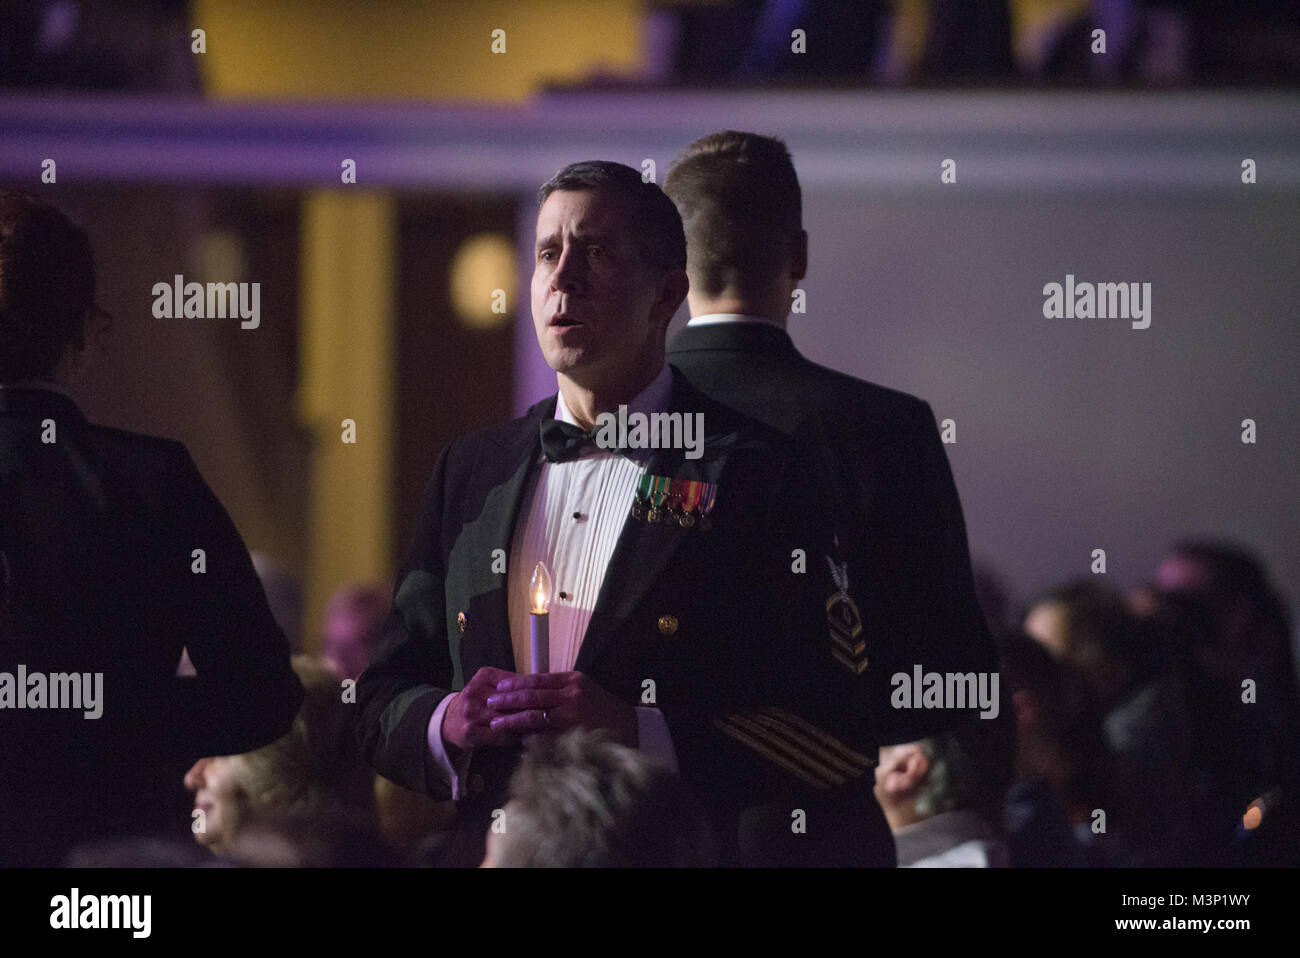 171216-N-VV903-1196 WASHINGTON (Dec. 16, 2017) Senior Chief Musician Adam Tyler performs with the U.S. Navy Band during a holiday concert at DAR Constitution Hall in Washington. The Navy Band hosted thousands of people from the Washington area as well as hundreds of senior Navy and government officials during its three annual holiday concerts. (U.S. Navy photo by Musician 1st Class David Aspinwall/Released) 171216-N-VV903-1196 by United States Navy Band Stock Photo